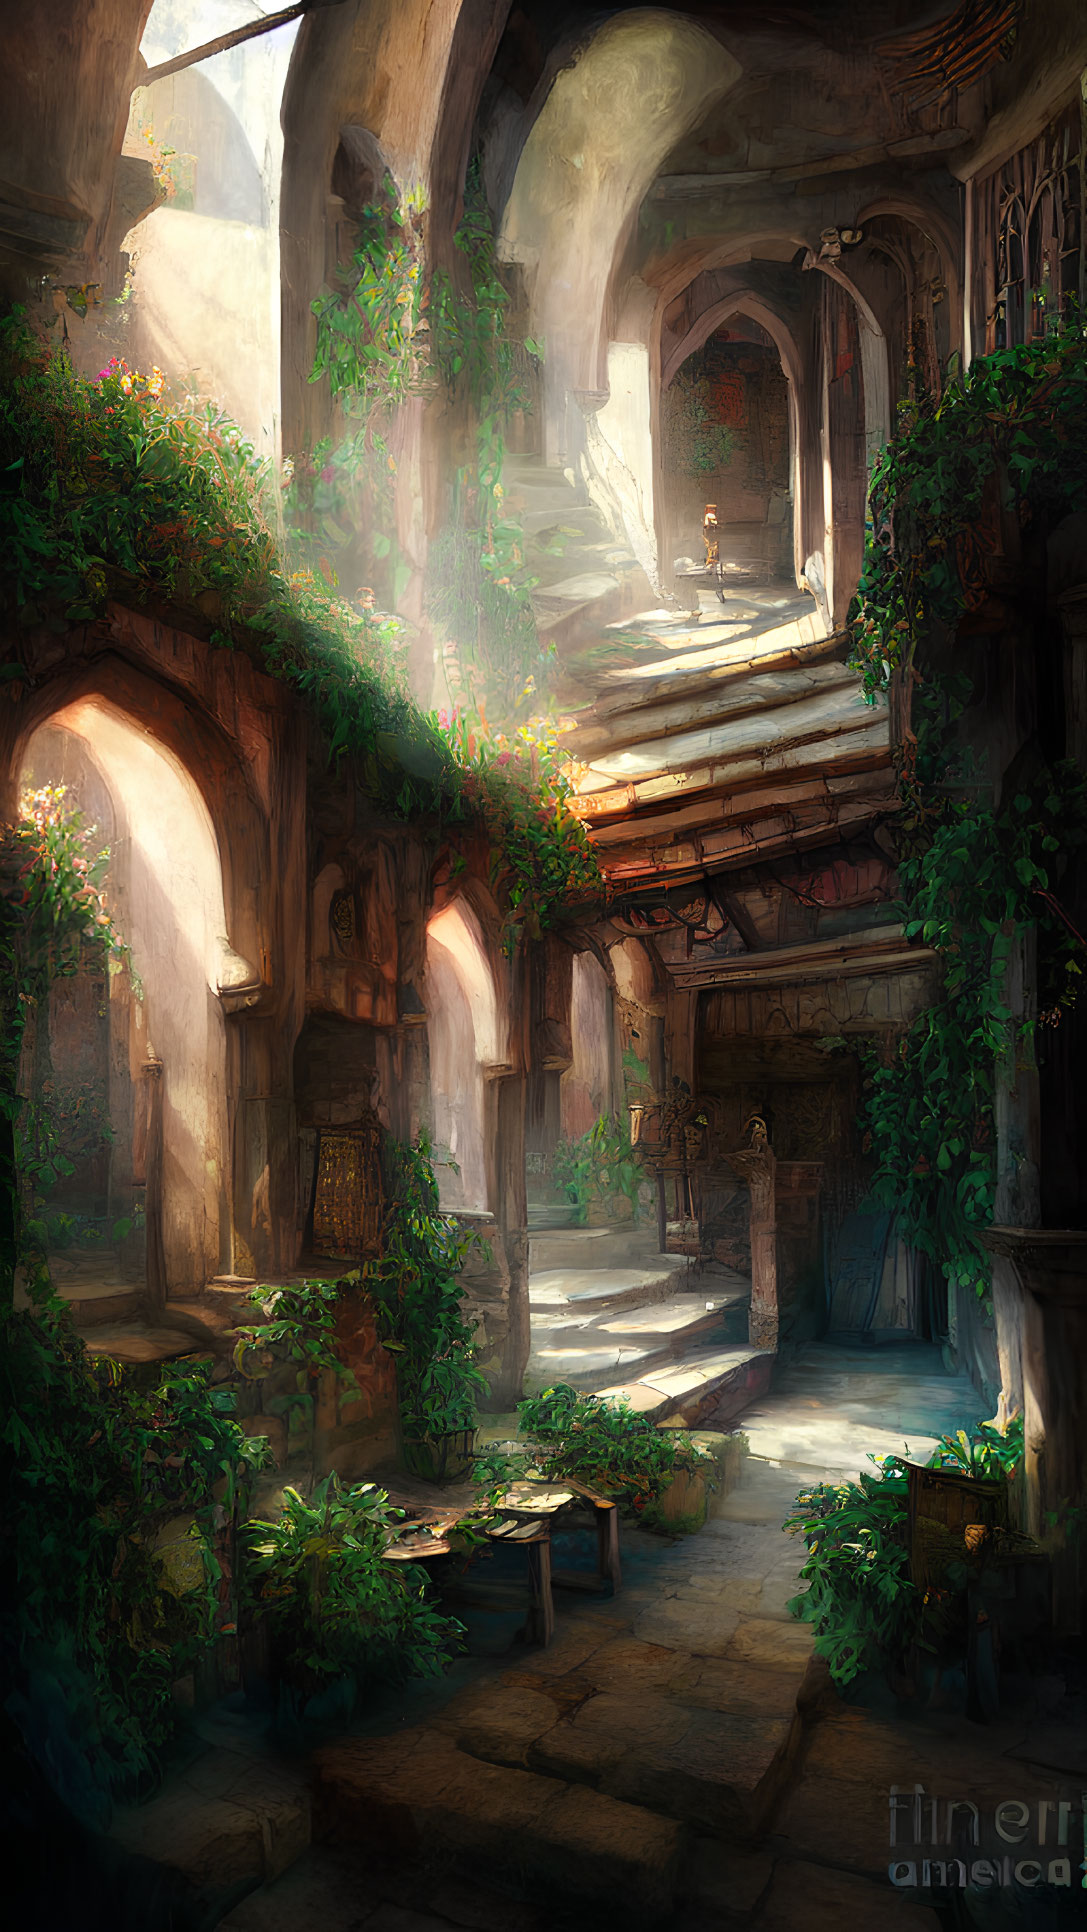 Sunlit courtyard with lush greenery, arches, balconies, and reclaimed ruins.